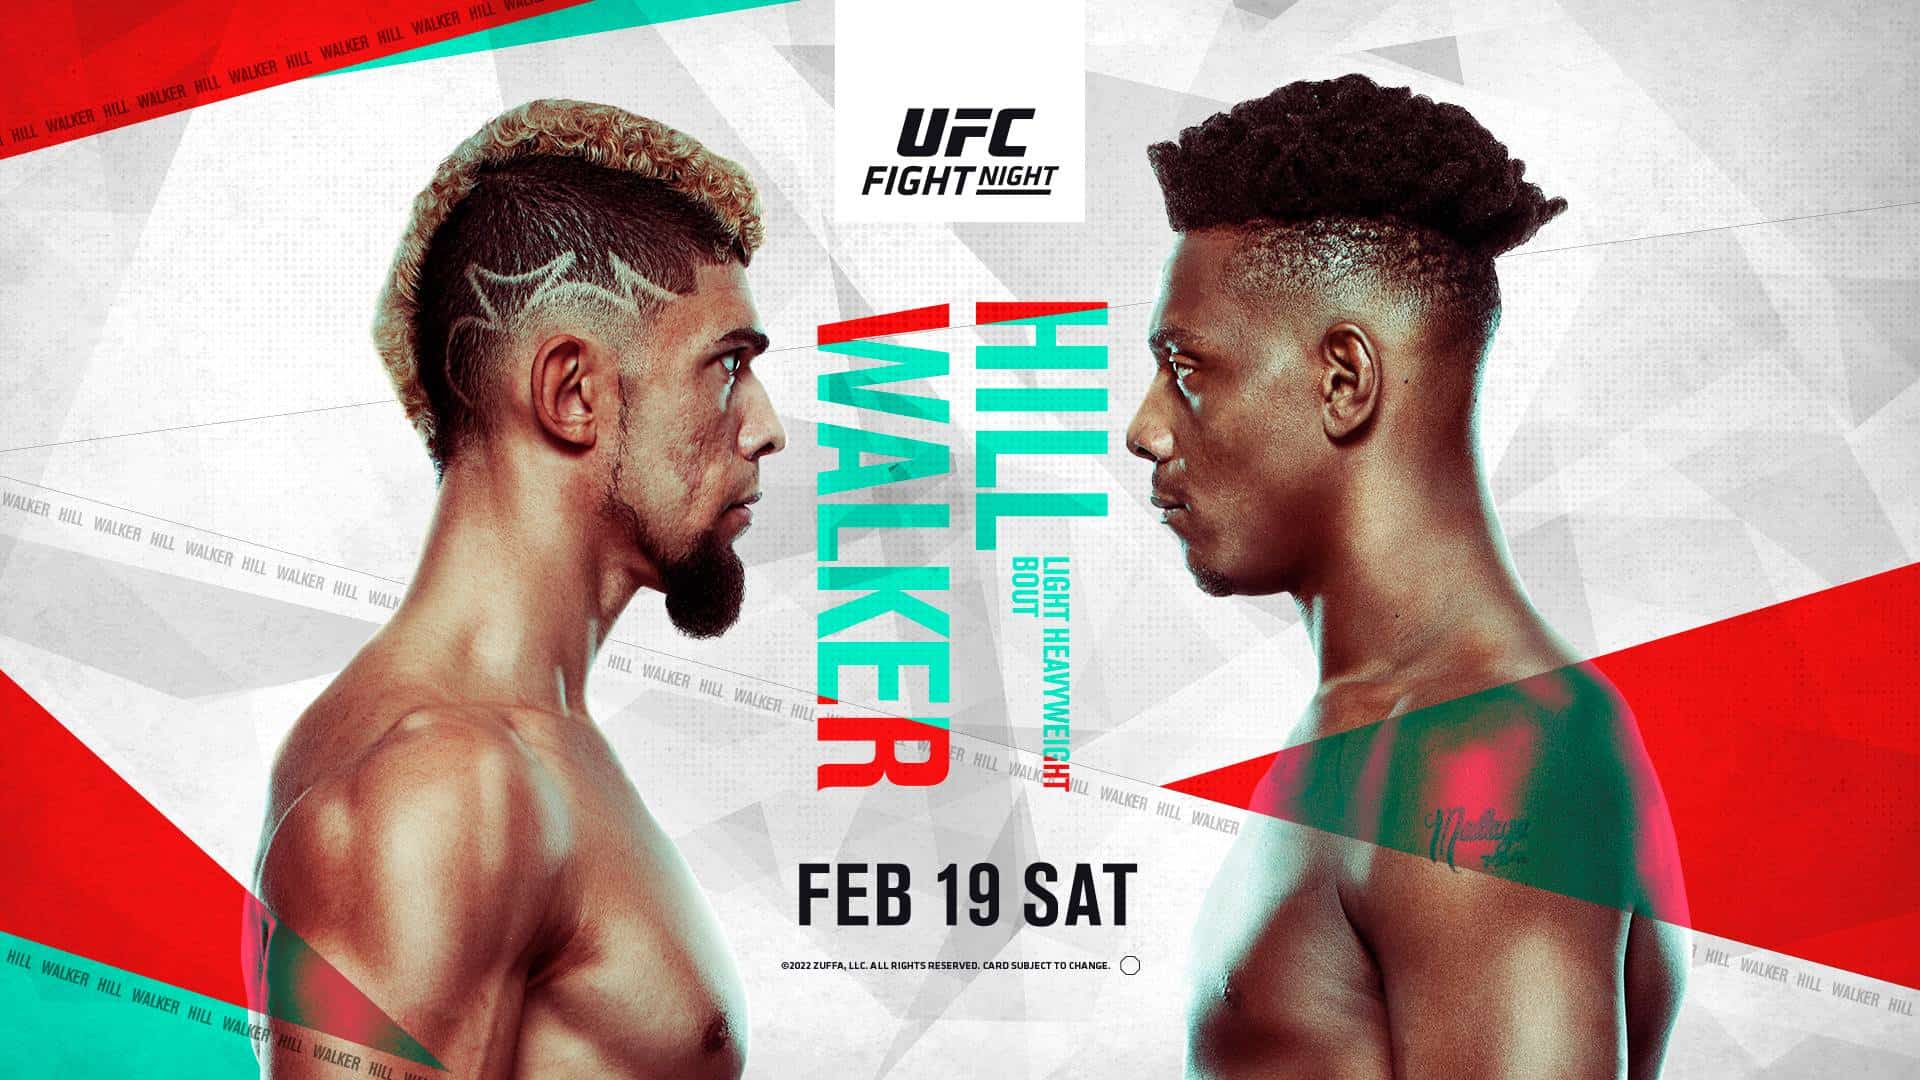 How to Watch UFC Fight Night: Walker vs. Hill